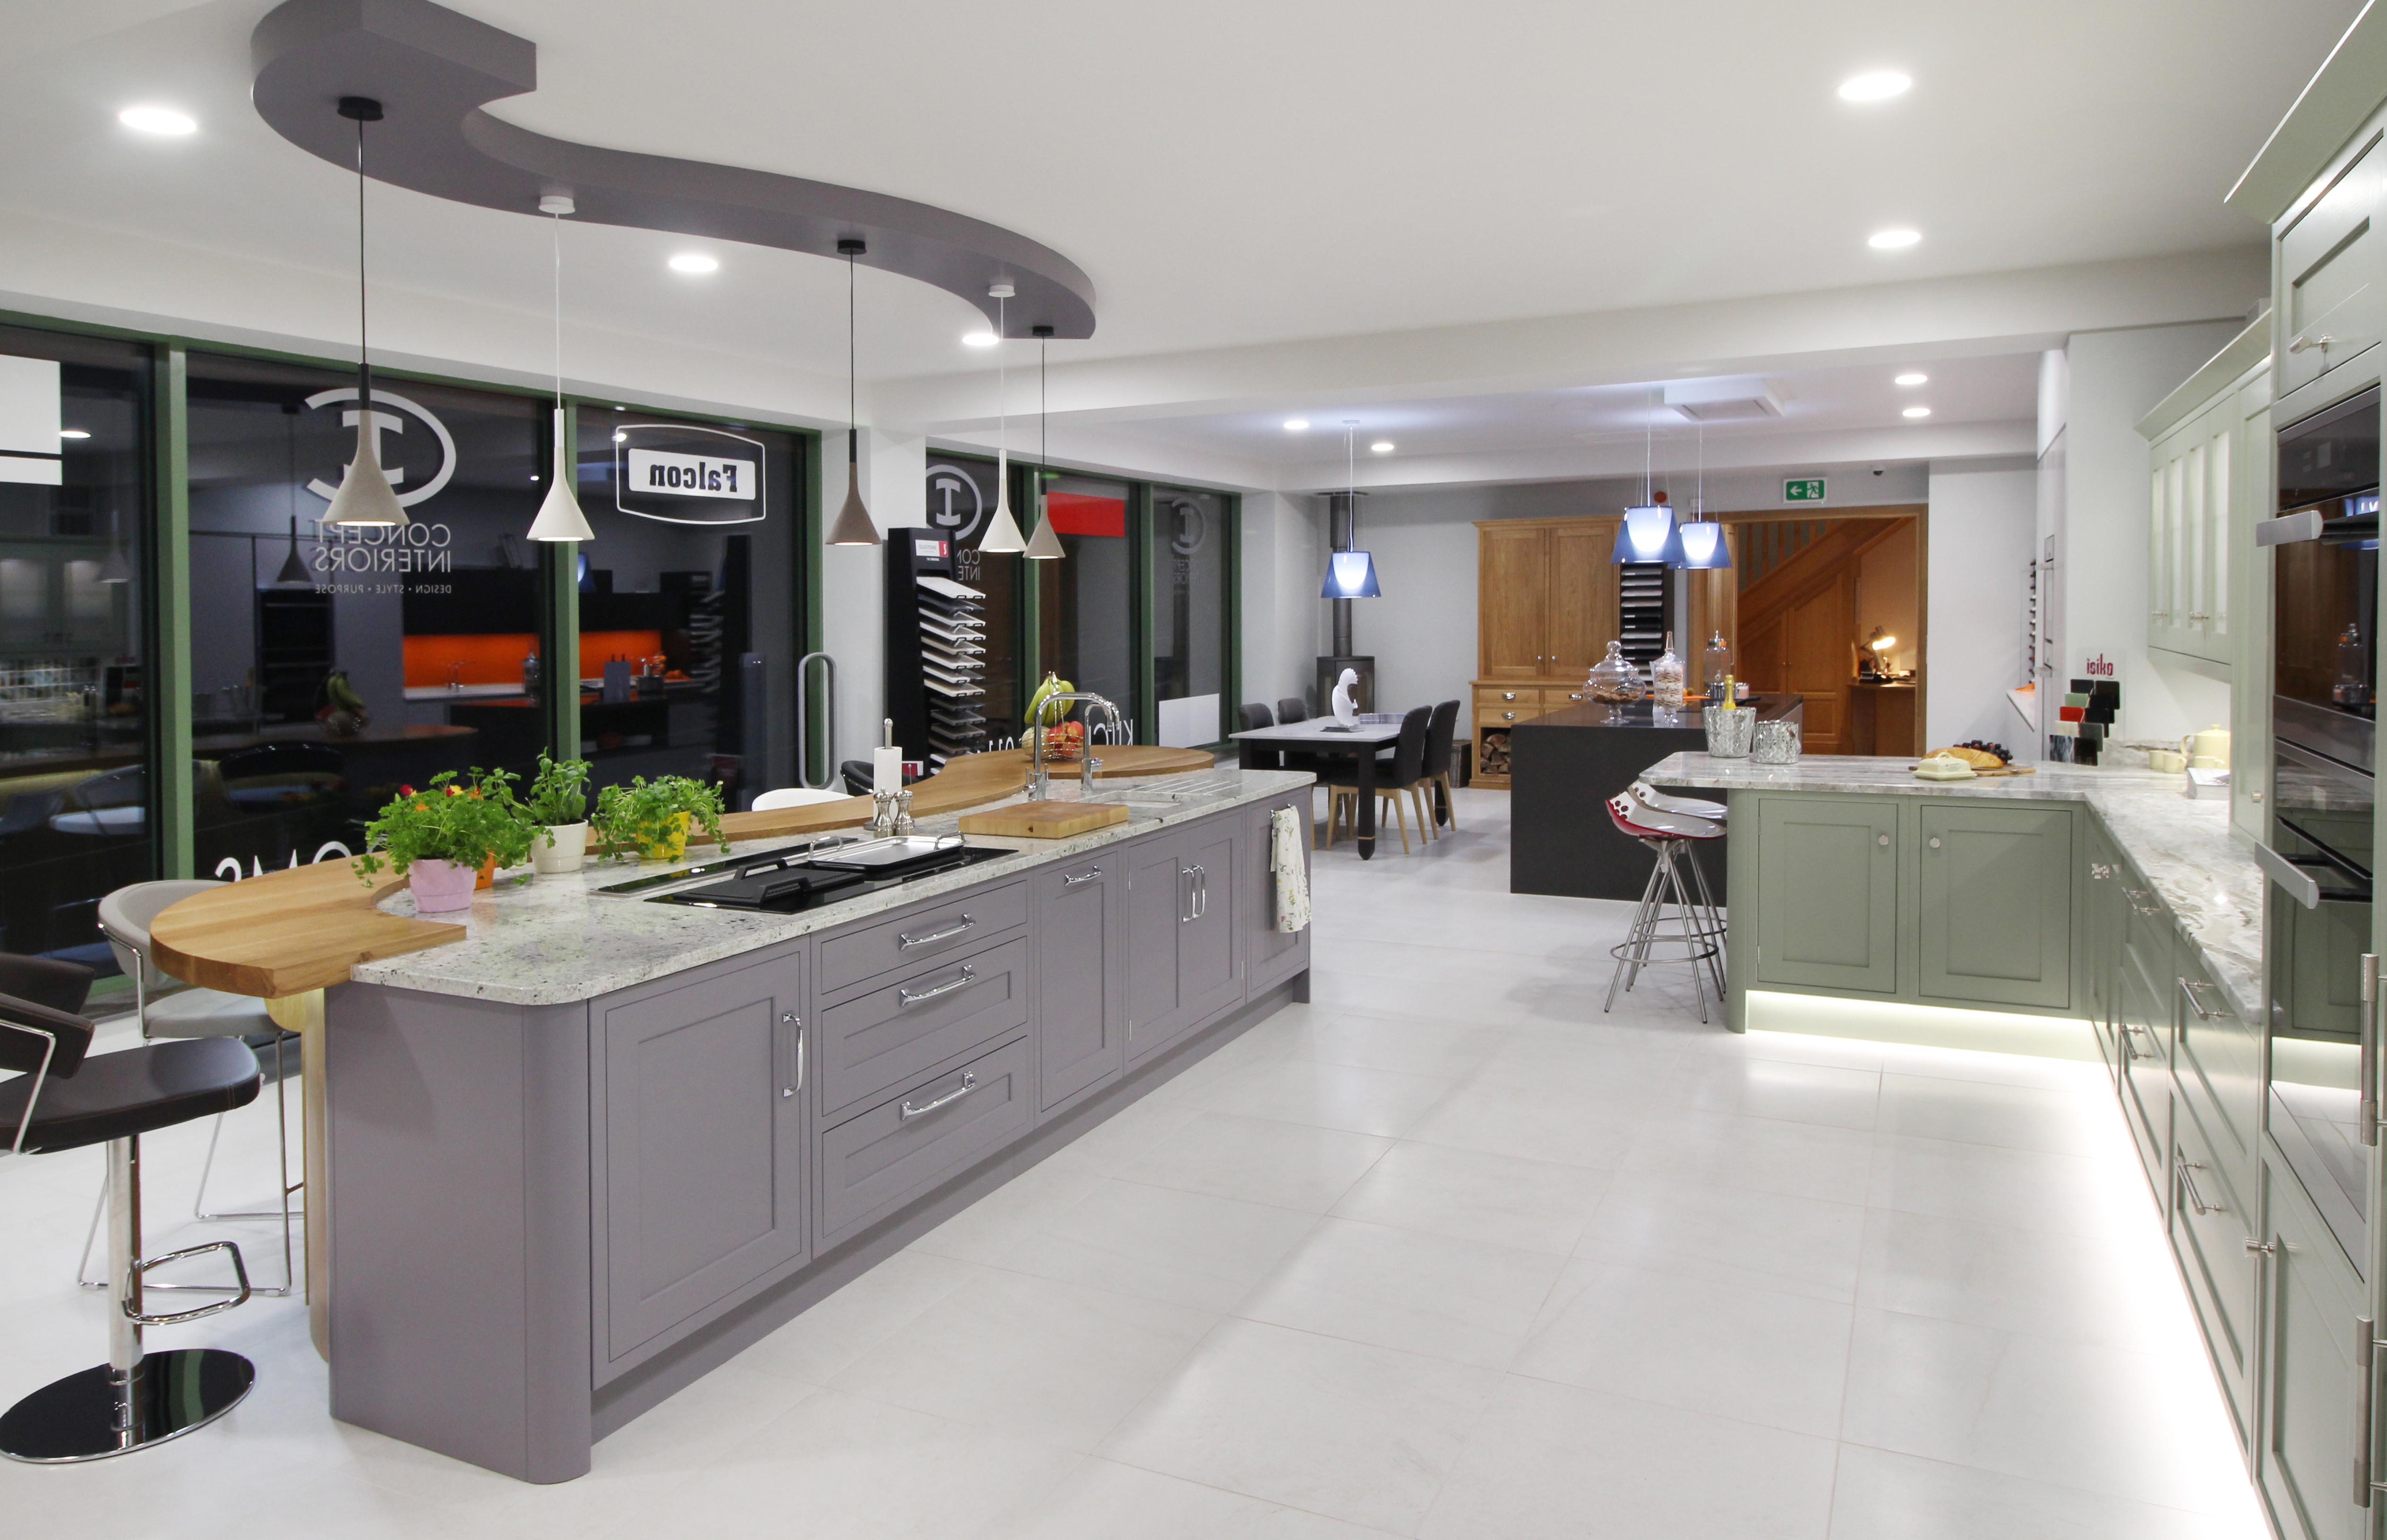 Our new state-of-the-art Kitchen showroom in Sheffield - Concept Interiors.